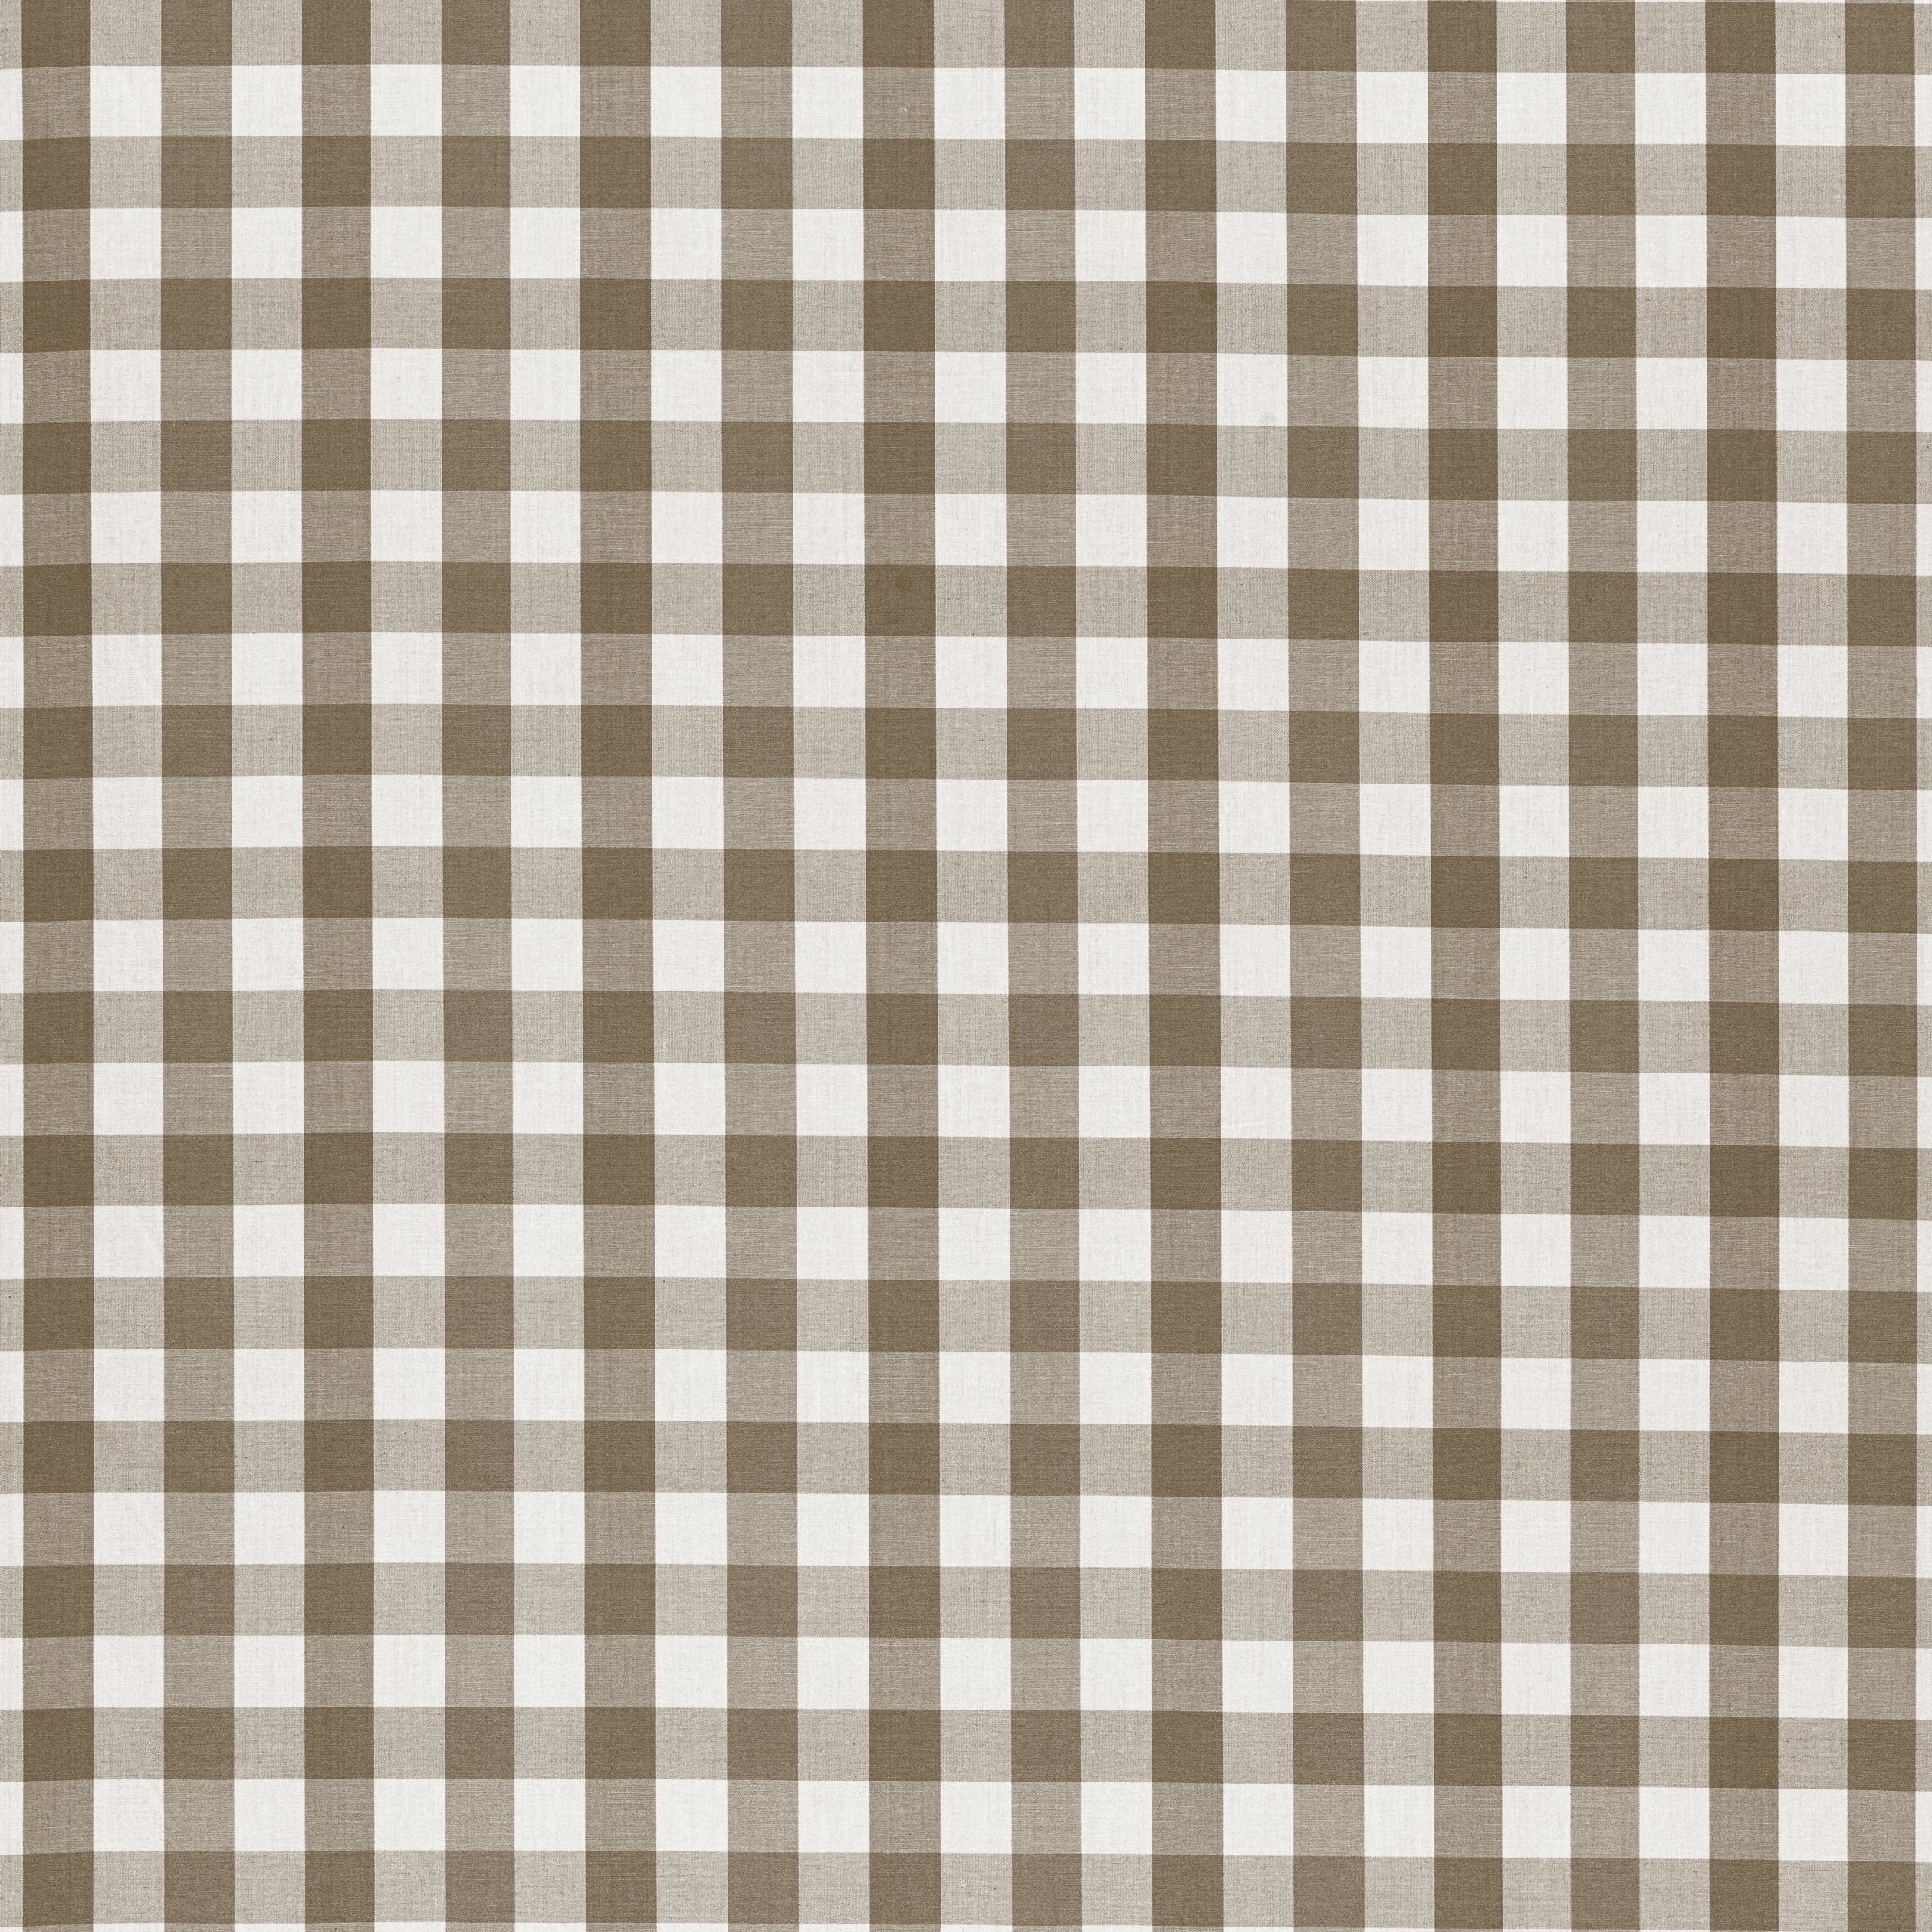 Saybrook Check fabric in brown color - pattern number AW15144 - by Anna French in the Antilles collection